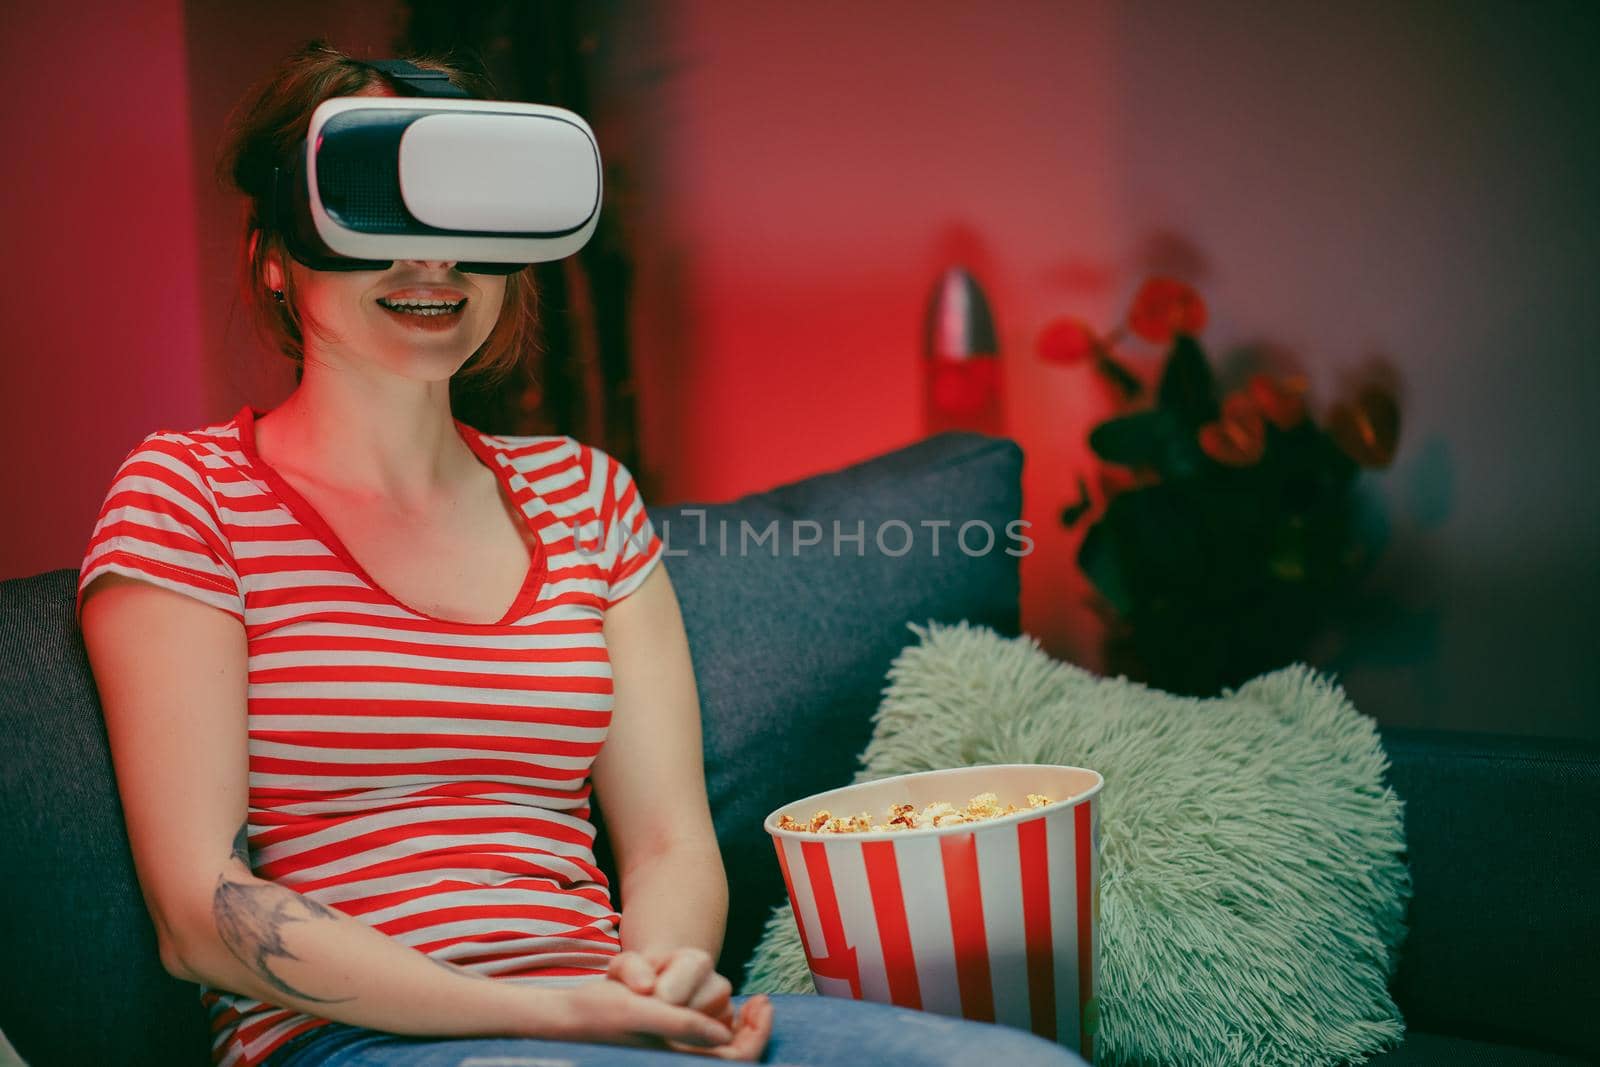 Portrait of the young woman sitting on the couch and having the VR headset, watching something while eating popcorn and smiling. Indoors